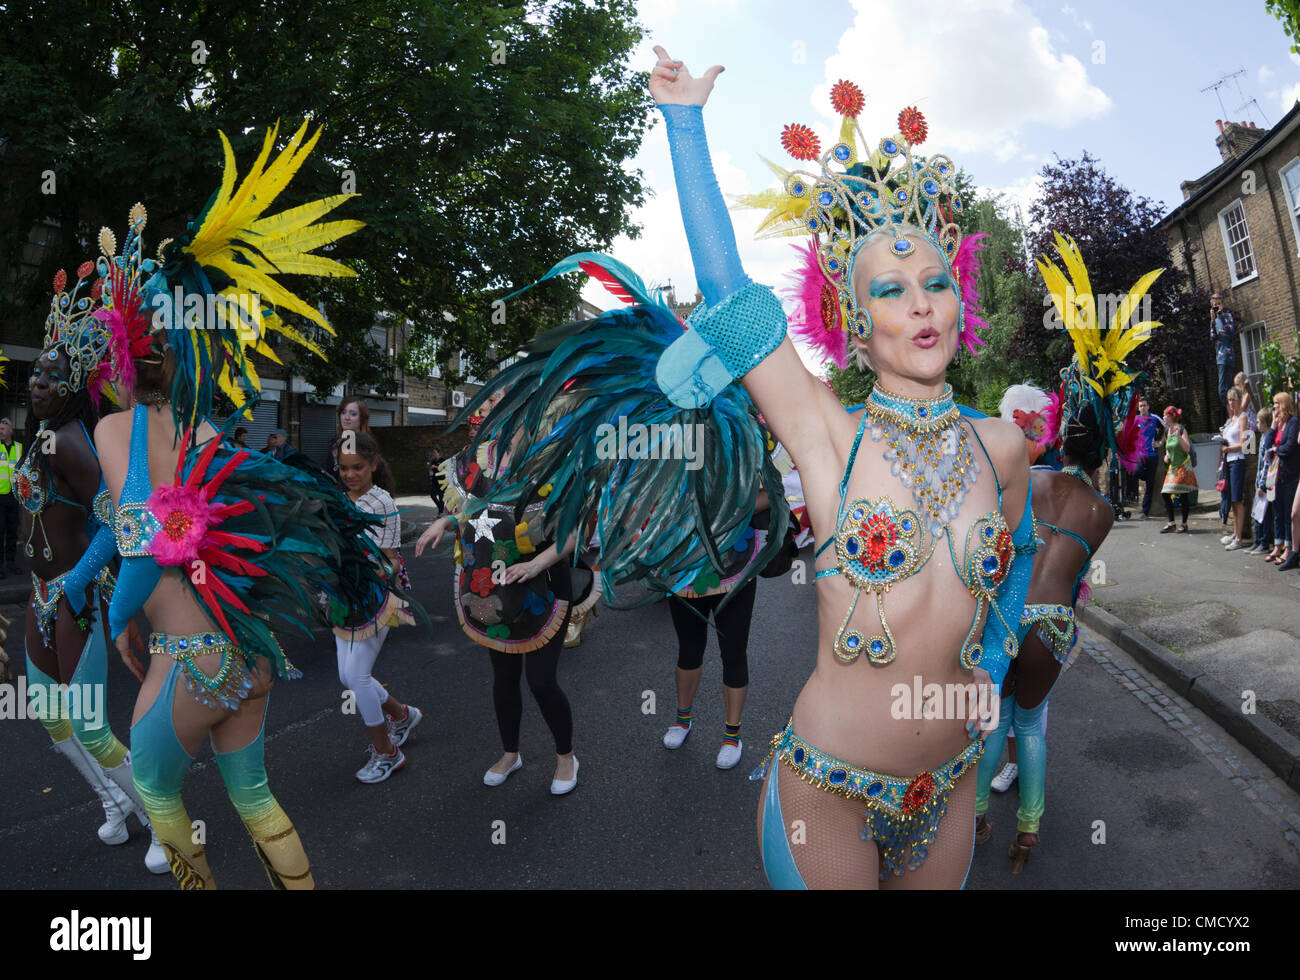 Hackney, London, UK. Saturday, 21 July 2012. Carnival Parade from Pitfield Street to Stoke Newington at the One Hackney Festival 2012. The festival is an all-day borough wide event taking place on Saturday, 21 July 2012 to welcome the Olympic Torch on its first day in London. Samba Dancers from the London School of Samba Stock Photo